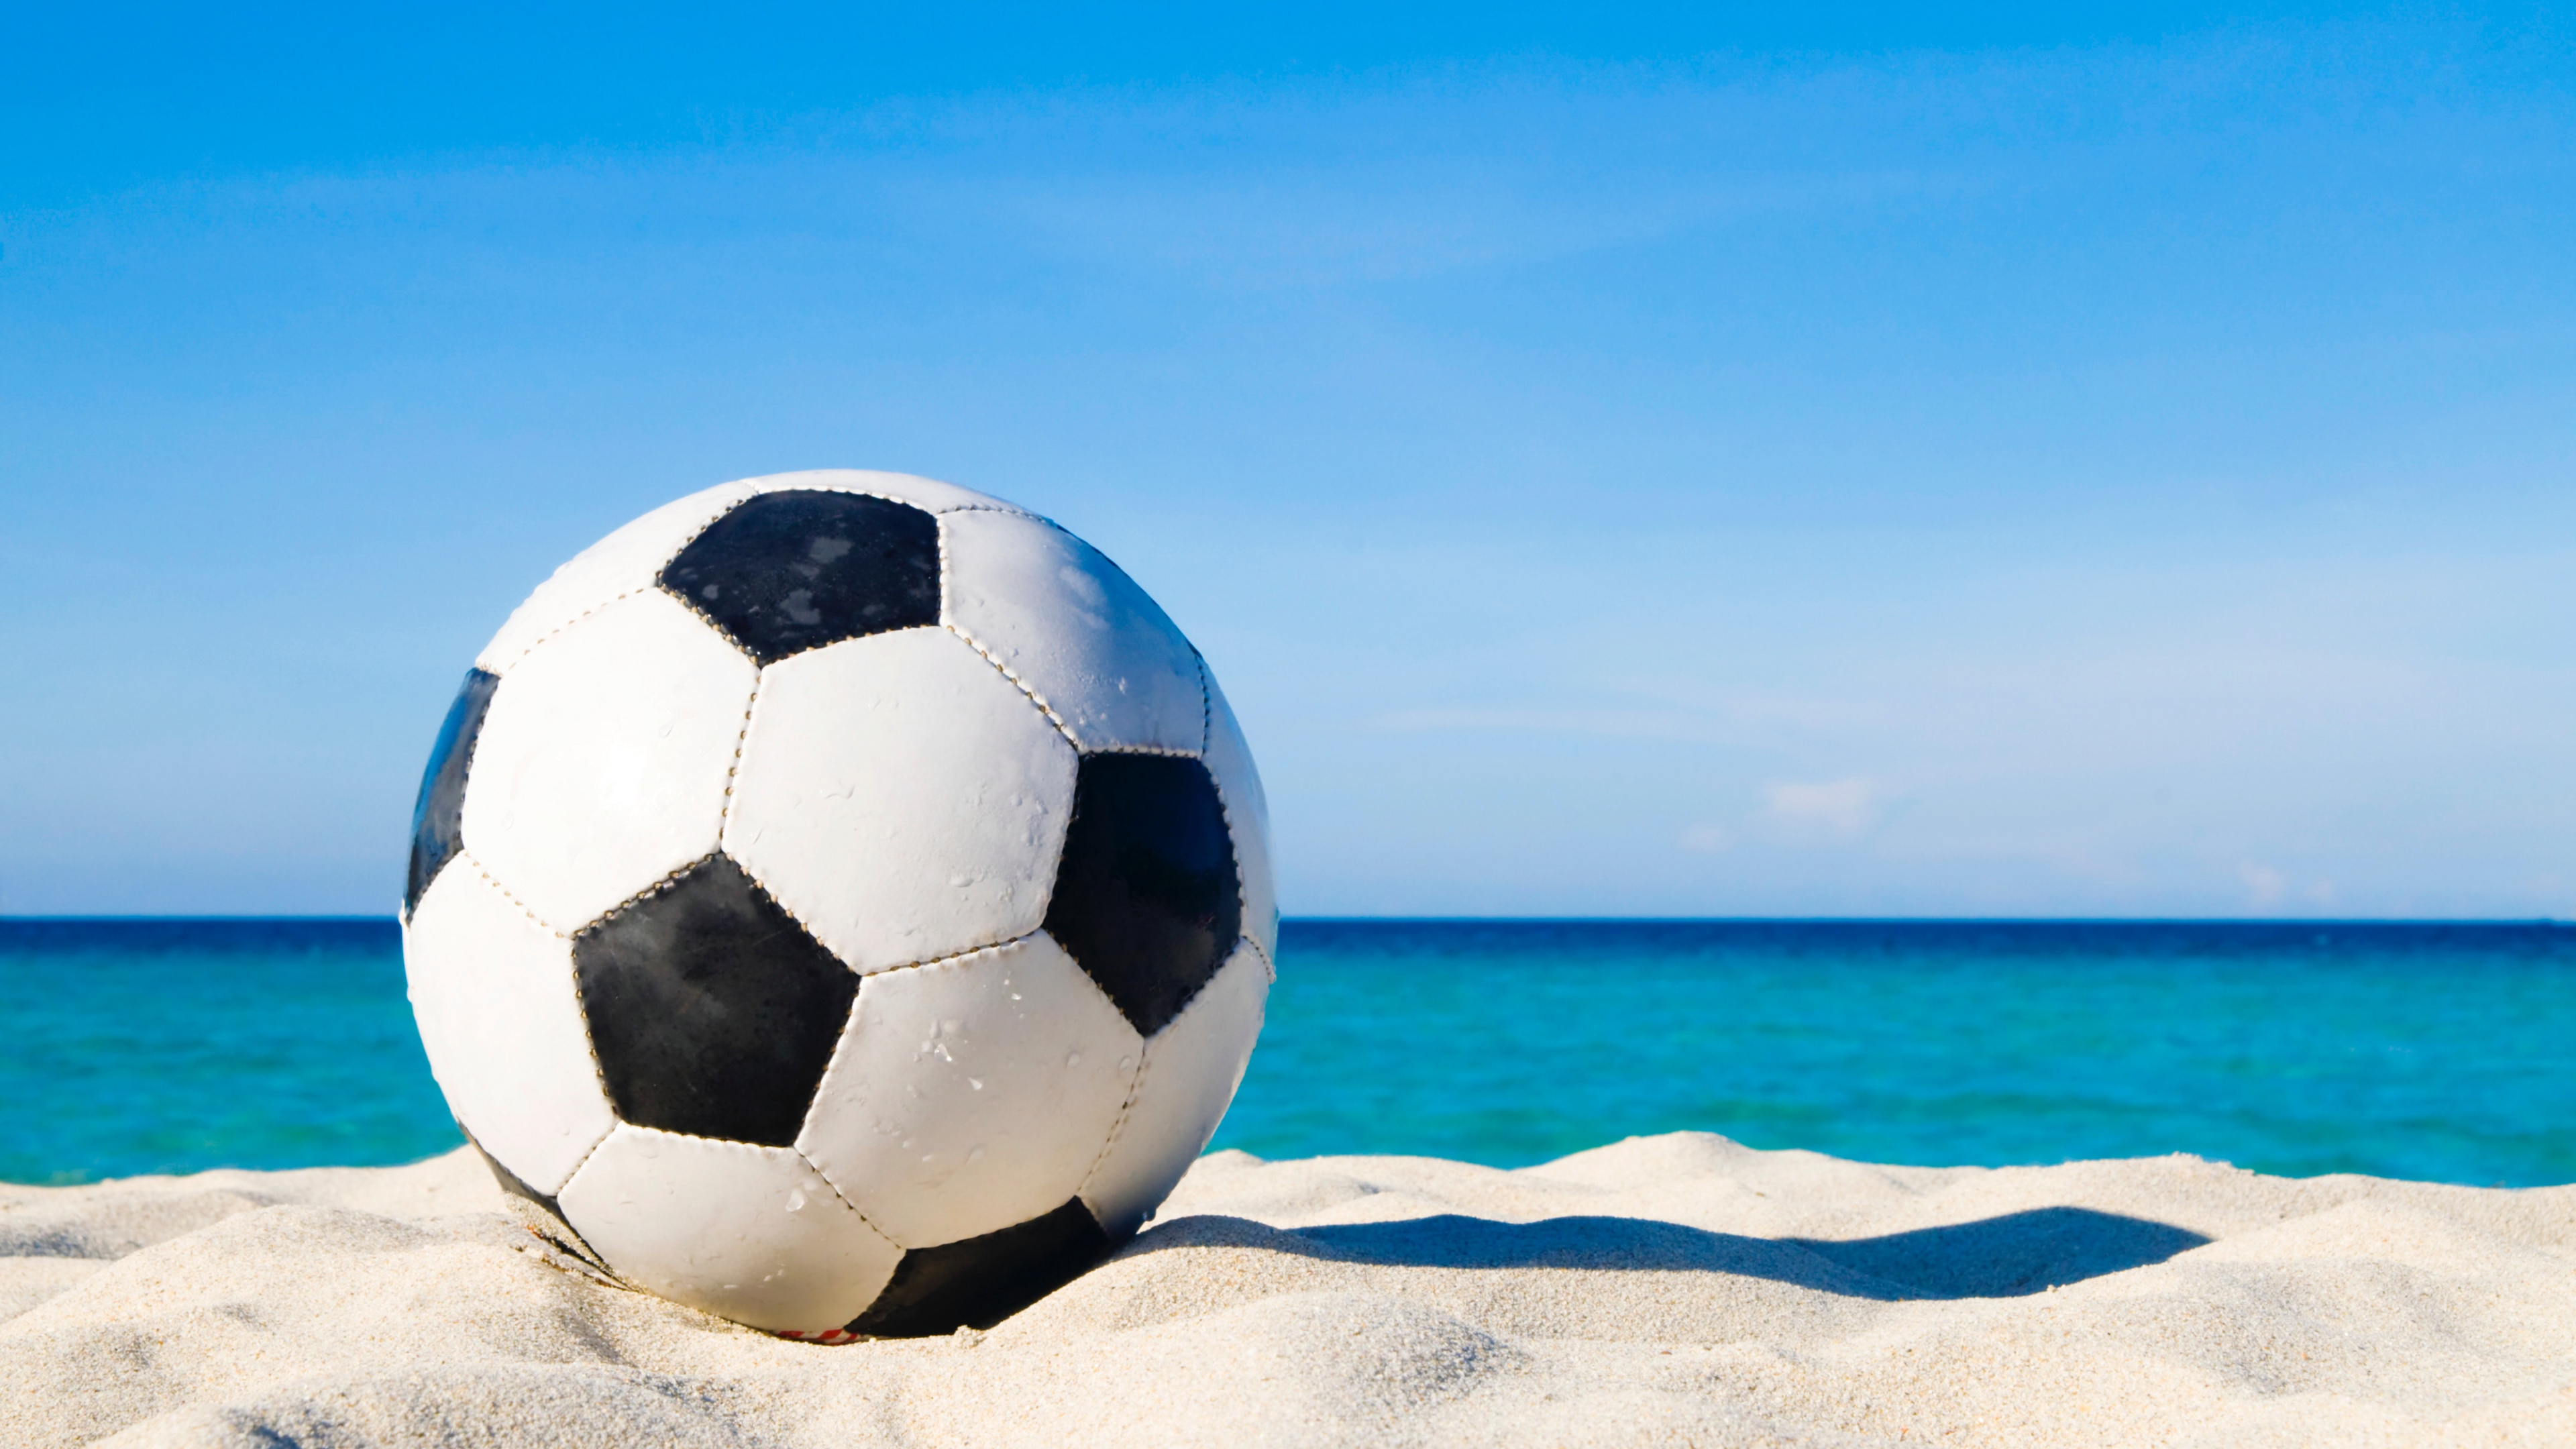 White and Black Soccer Ball on White Sand During Daytime. Wallpaper in 3840x2160 Resolution